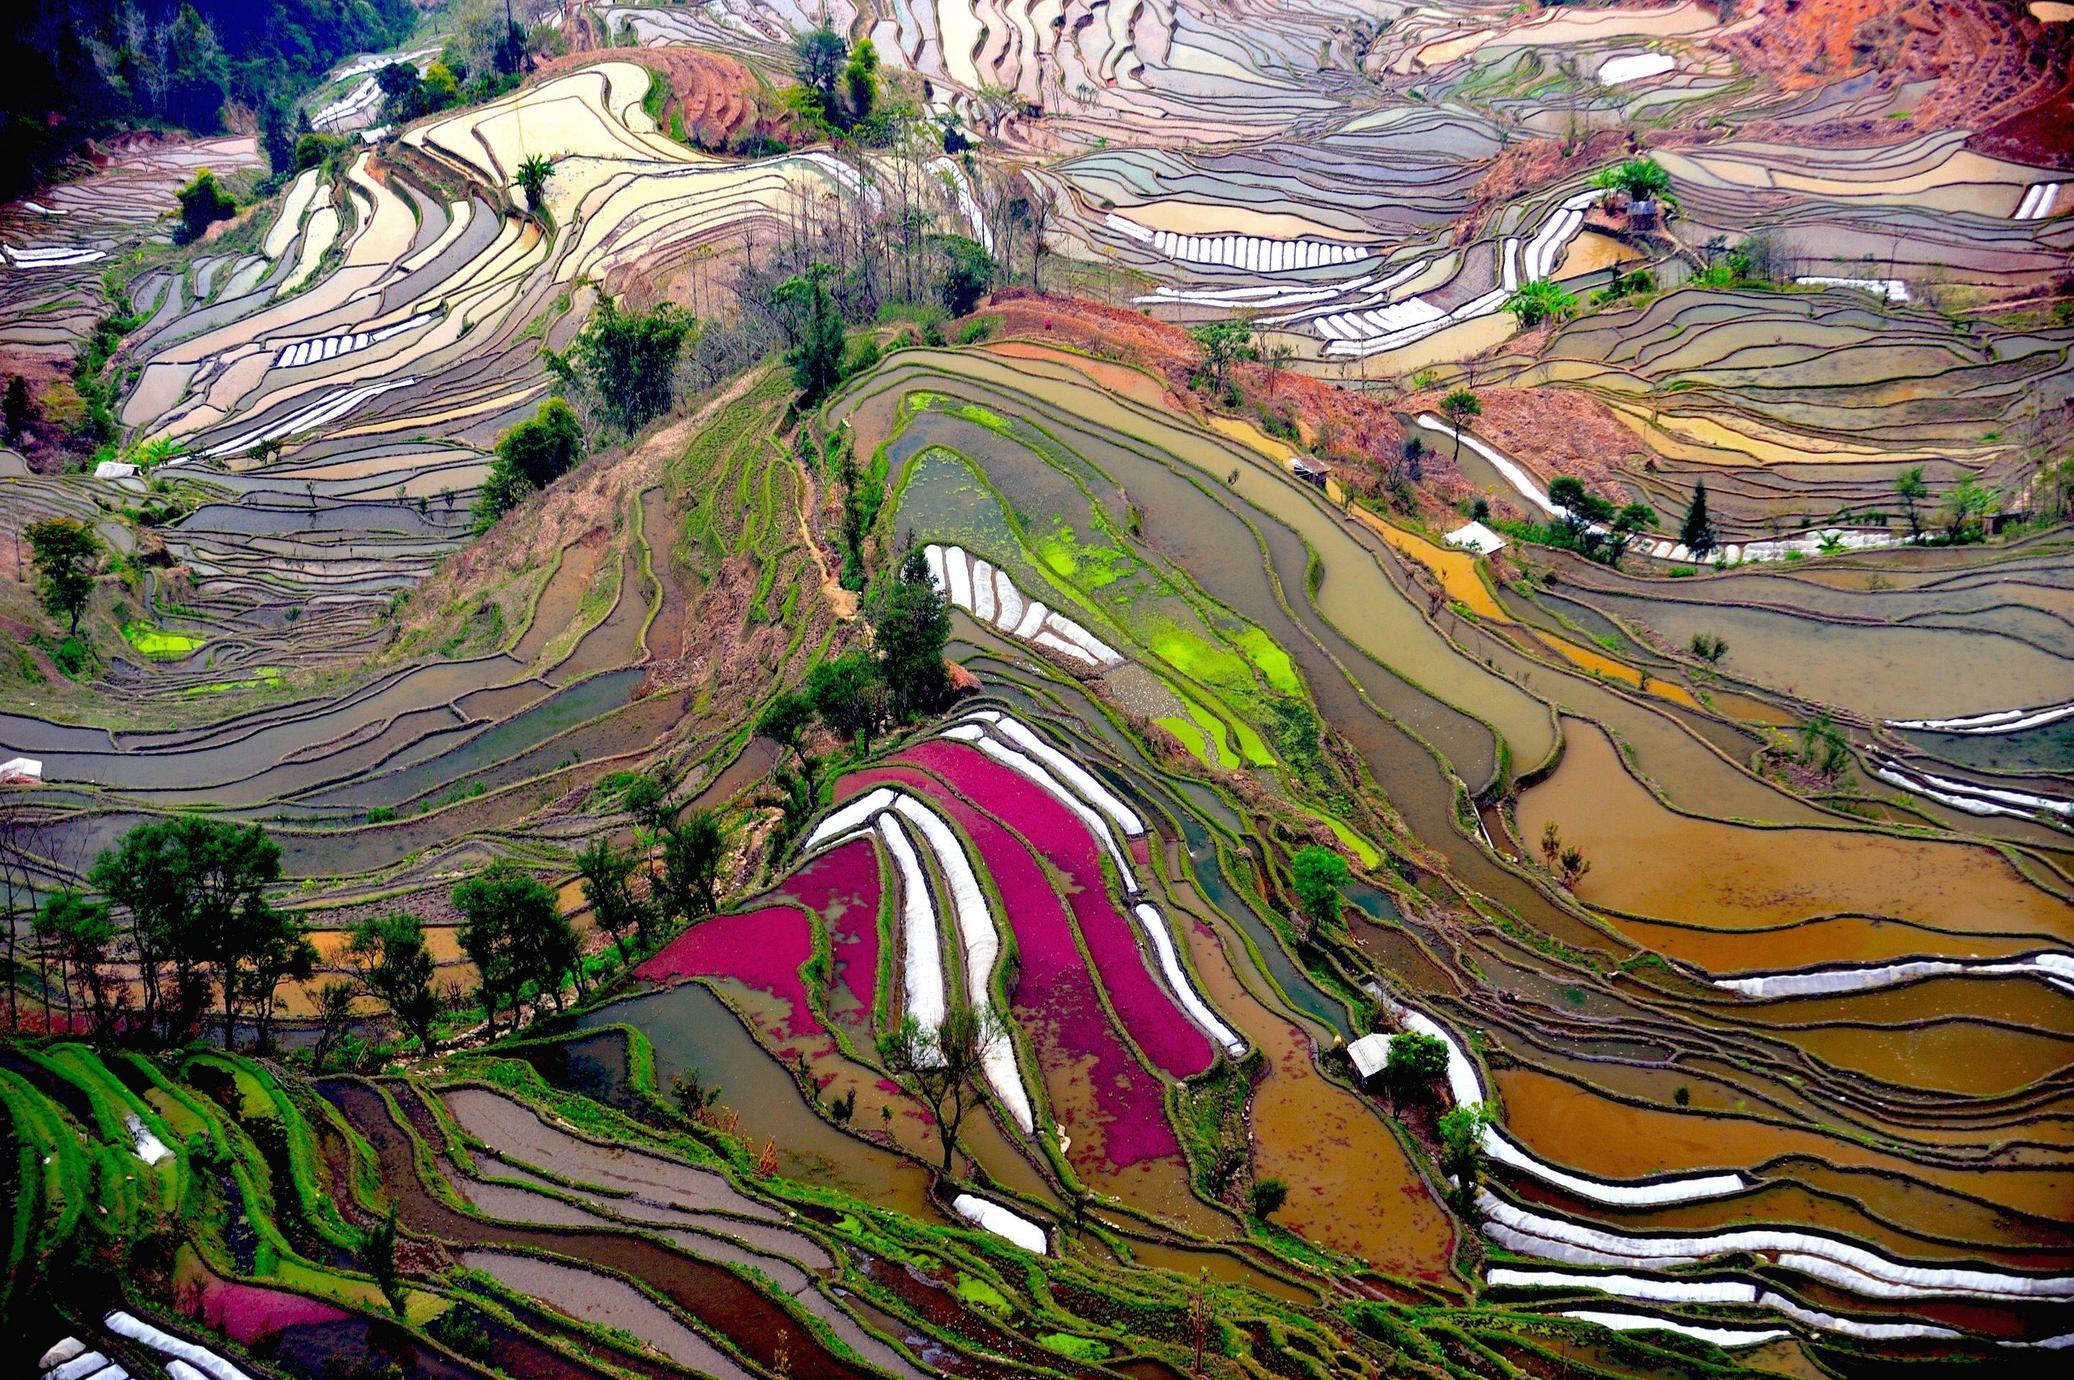 The rice field terraces of Yunnan, China.